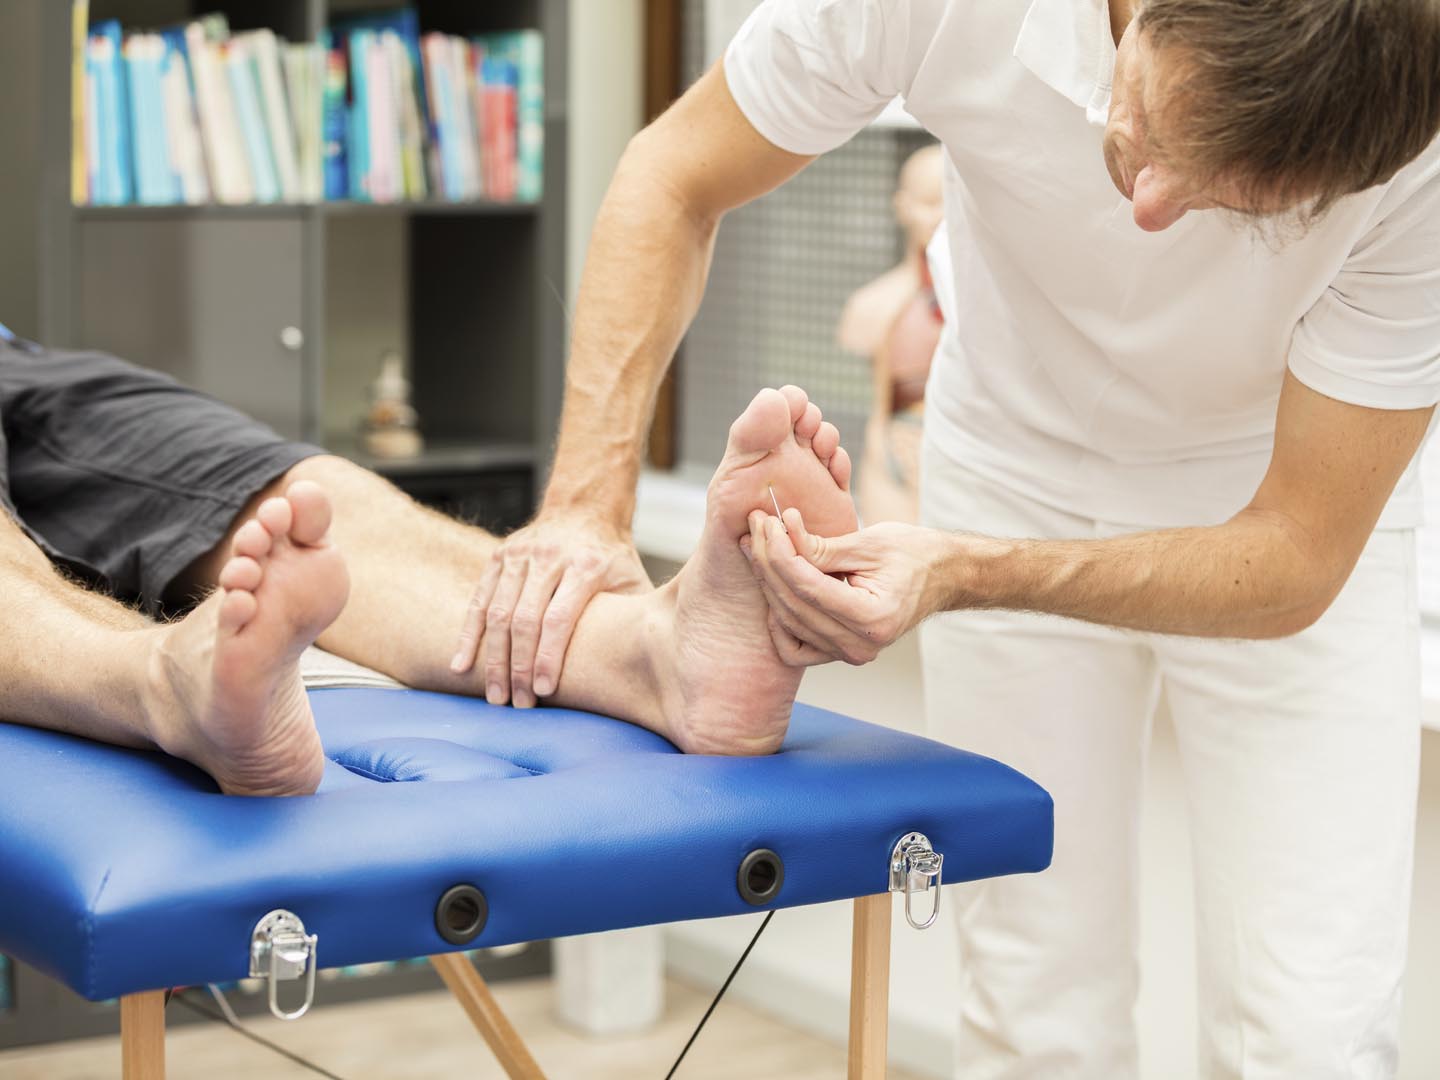 A  doctor, testing the sensibility  of a patient`s foot. This test is often used for checking neuropathy of diabetic patients. XXXL size image.